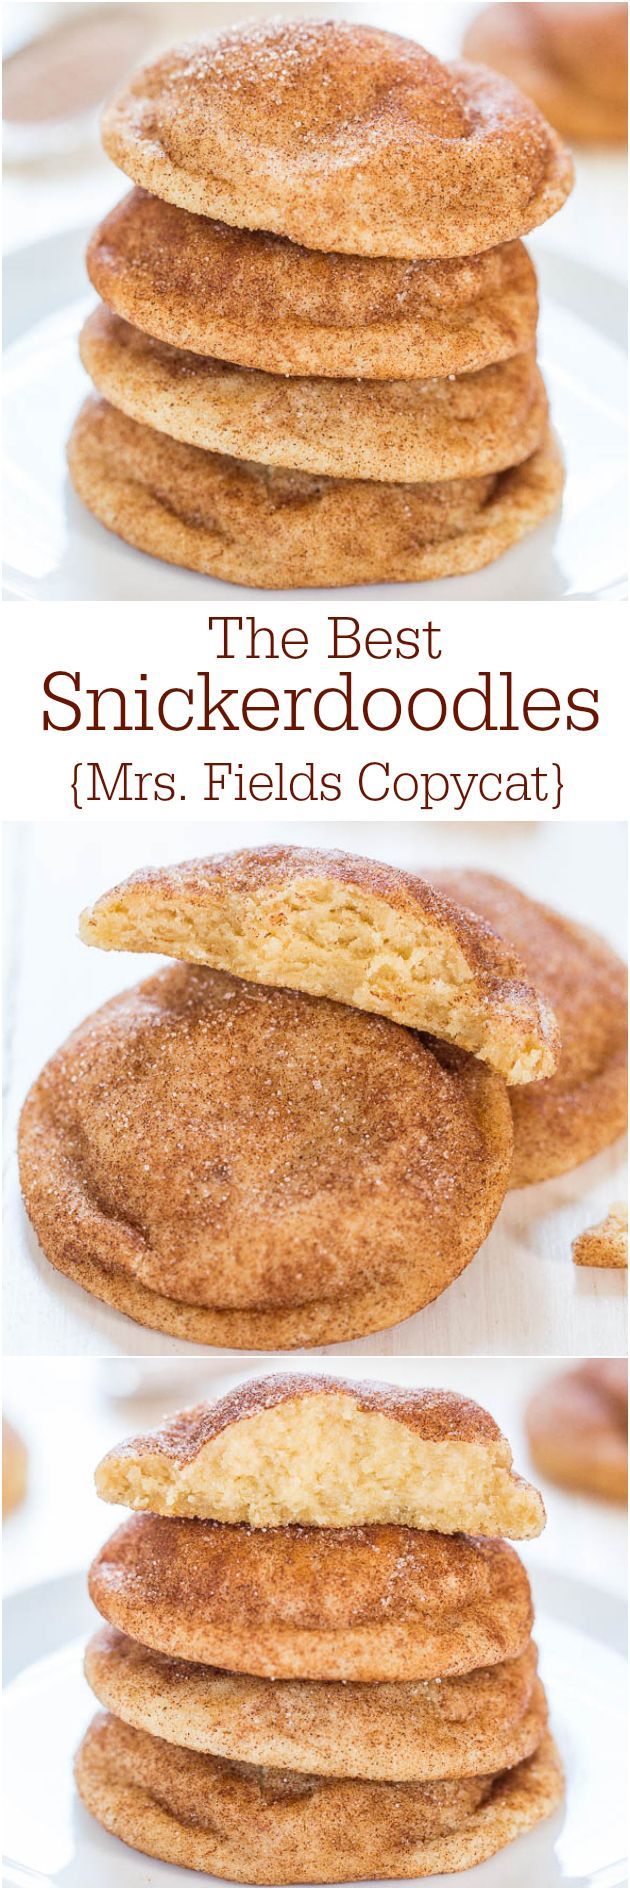 The Best Snickerdoodles – Soft, pillowy puffs that are so irresistible! The closest recipe to Mrs. Fields snickerdoodles that